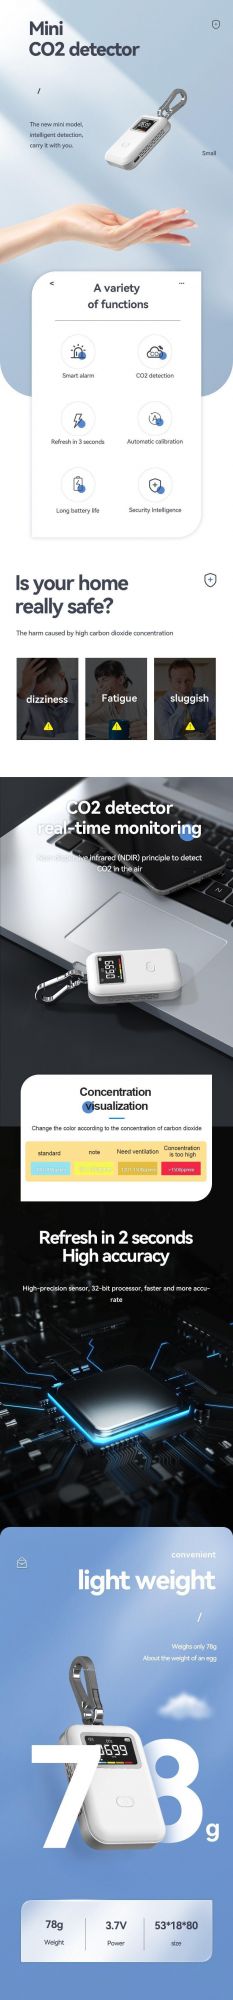 Portable Air Detector Multifunctional CO2 Detector High Accuracy